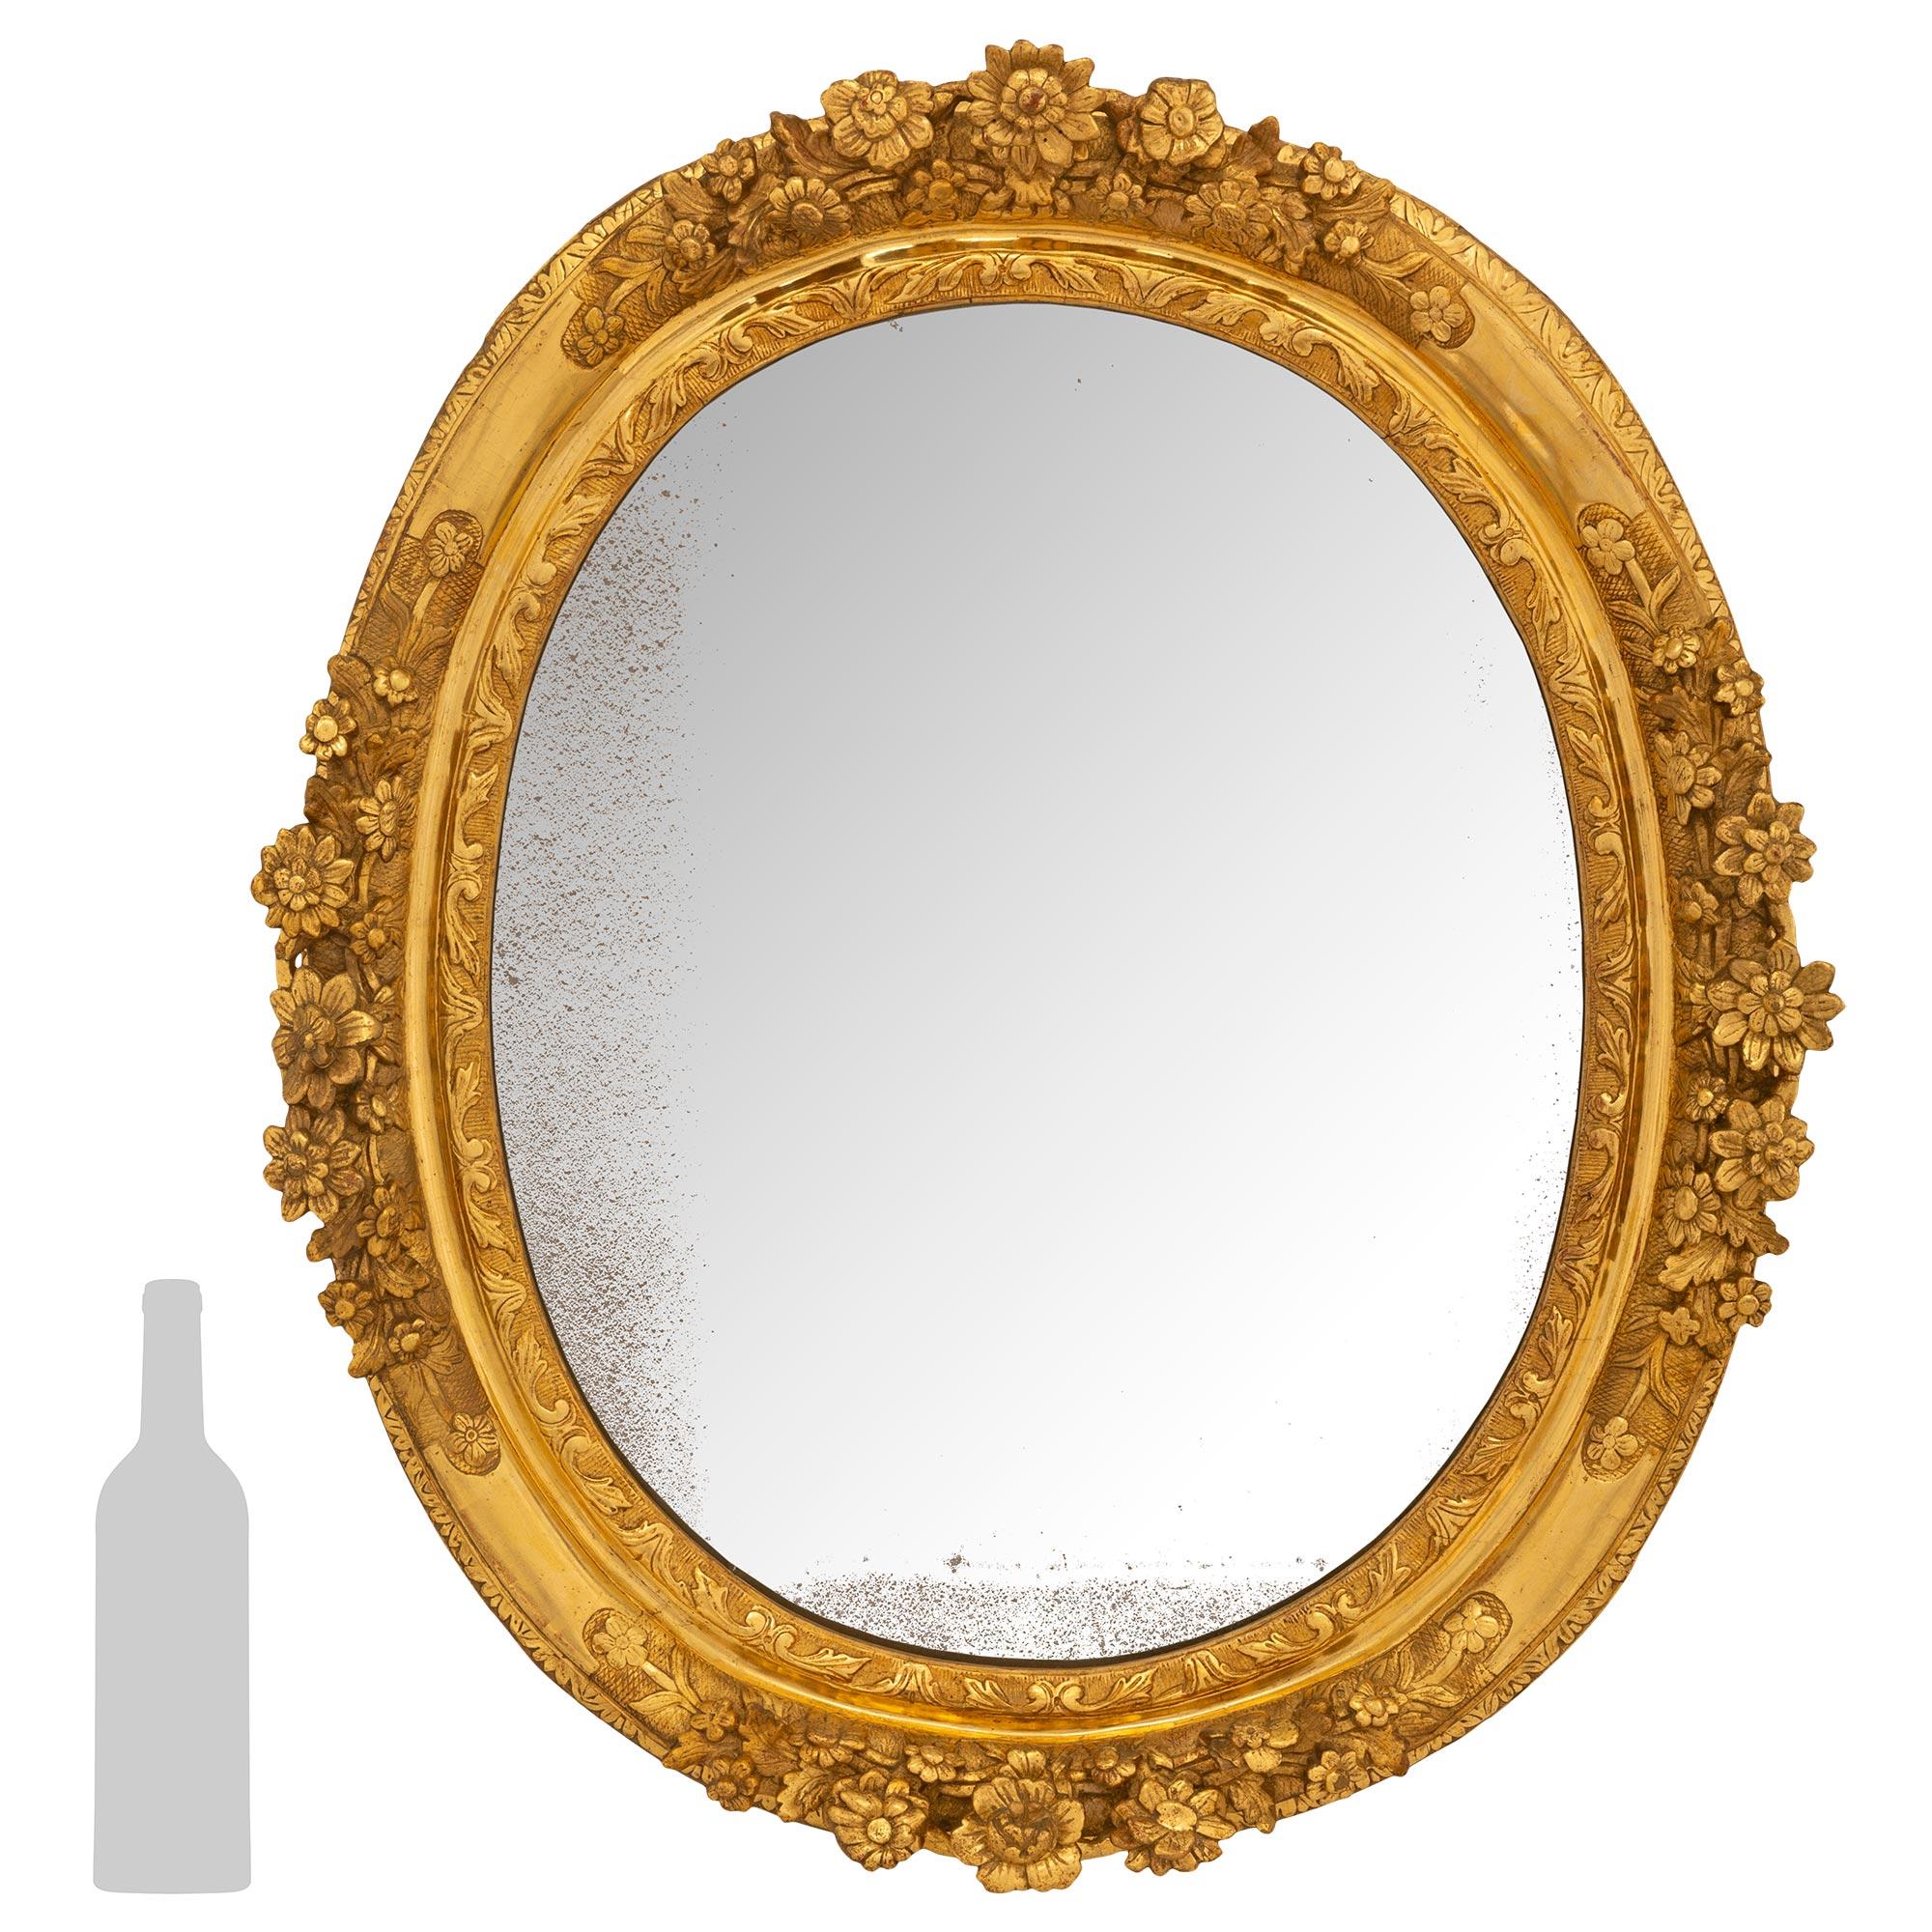 A stunning French 18th century Louis XIV Period finely carved giltwood mirror. This oval mirror has an interior scrolled designed border and large protruding carved foliate frame with acanthus leaf designed trim. With all original mirror plate and